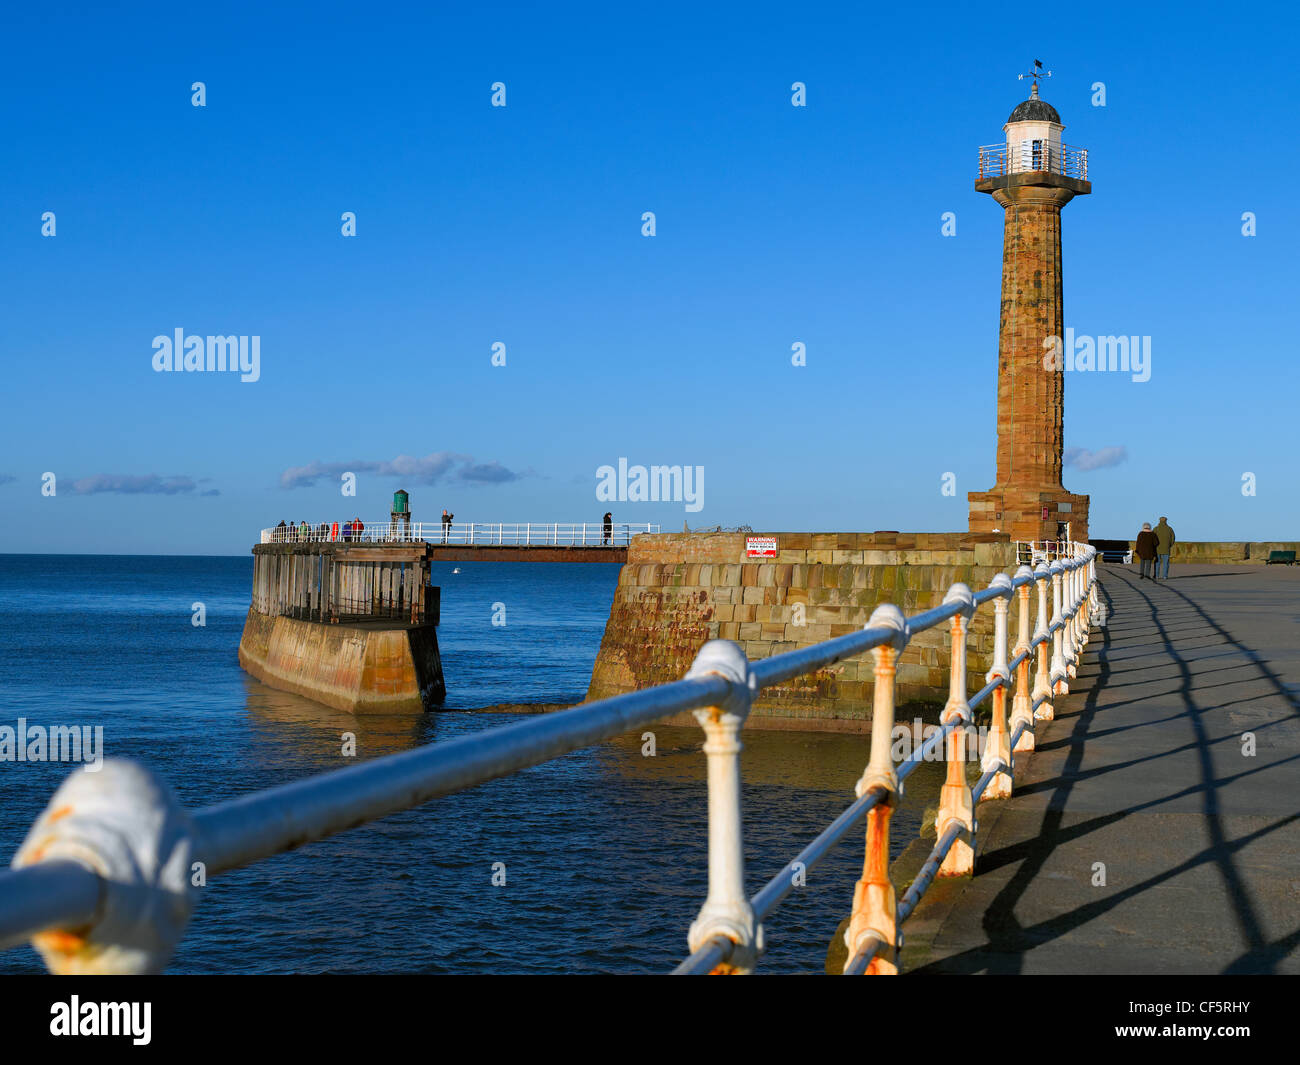 Whitby West Pier Light (Old) built in 1831 on the West Pier. The lighthouse was replaced by Whitby West Pier Light (New) at the Stock Photo